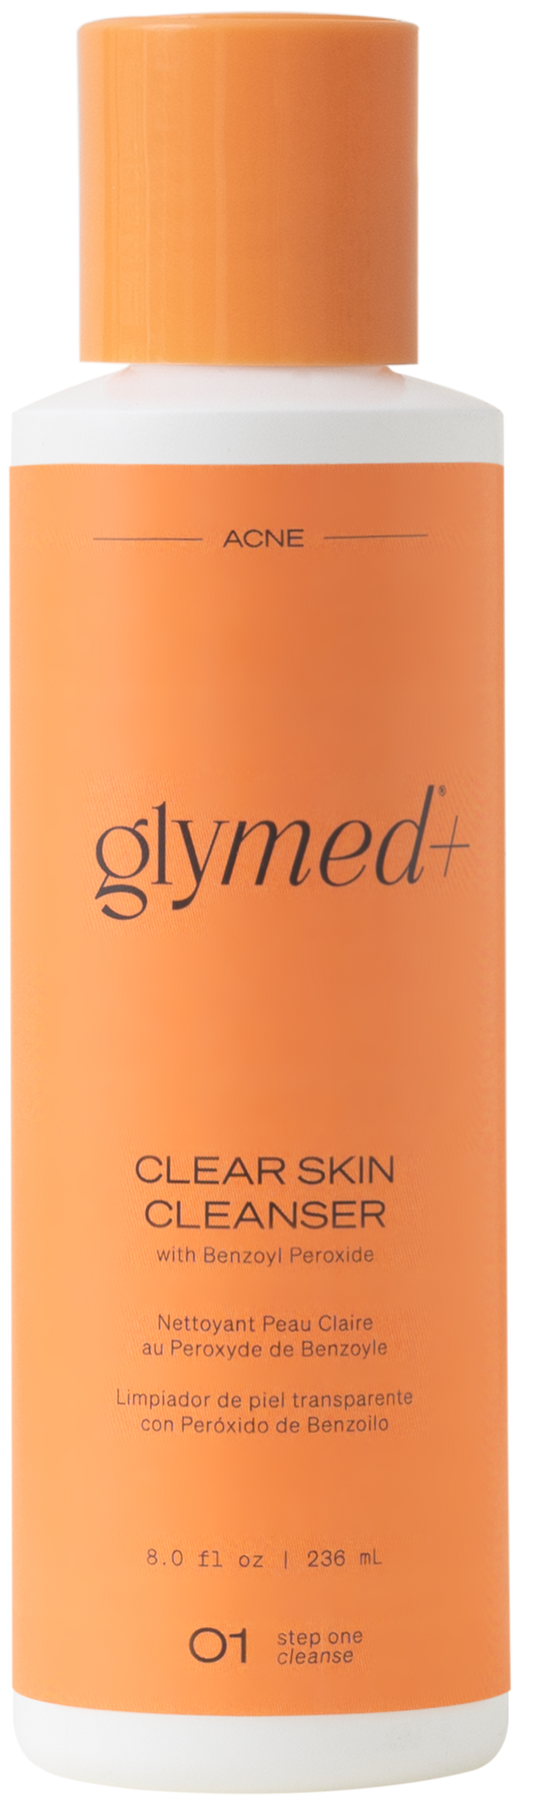 Clear Skin Cleanser with Benzoyl Peroxide